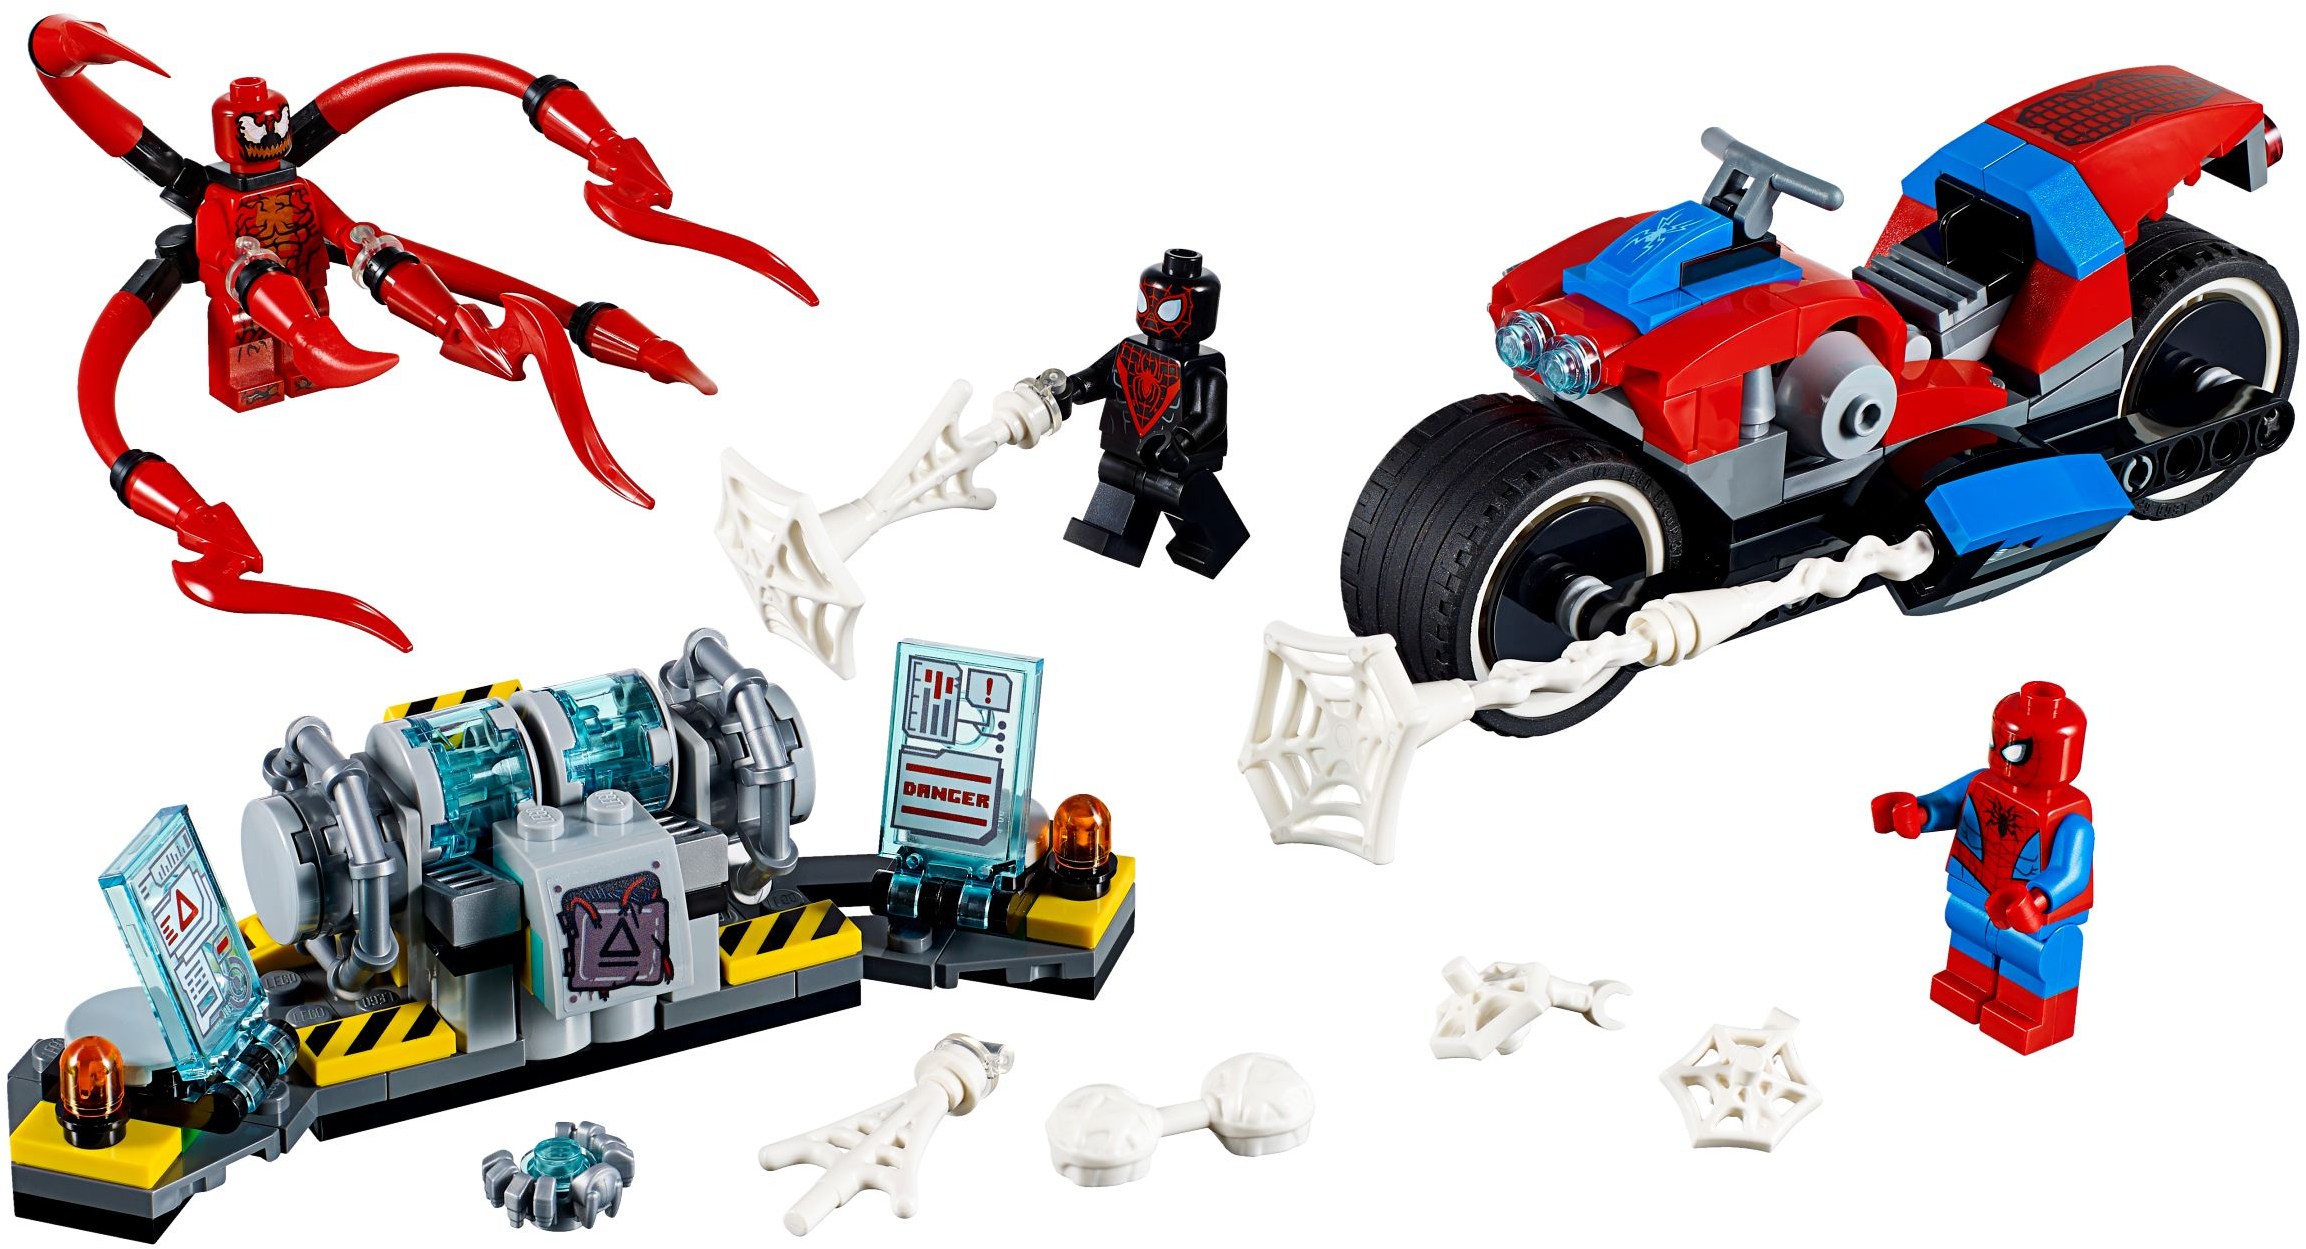 lego spider man far from home sets 2019